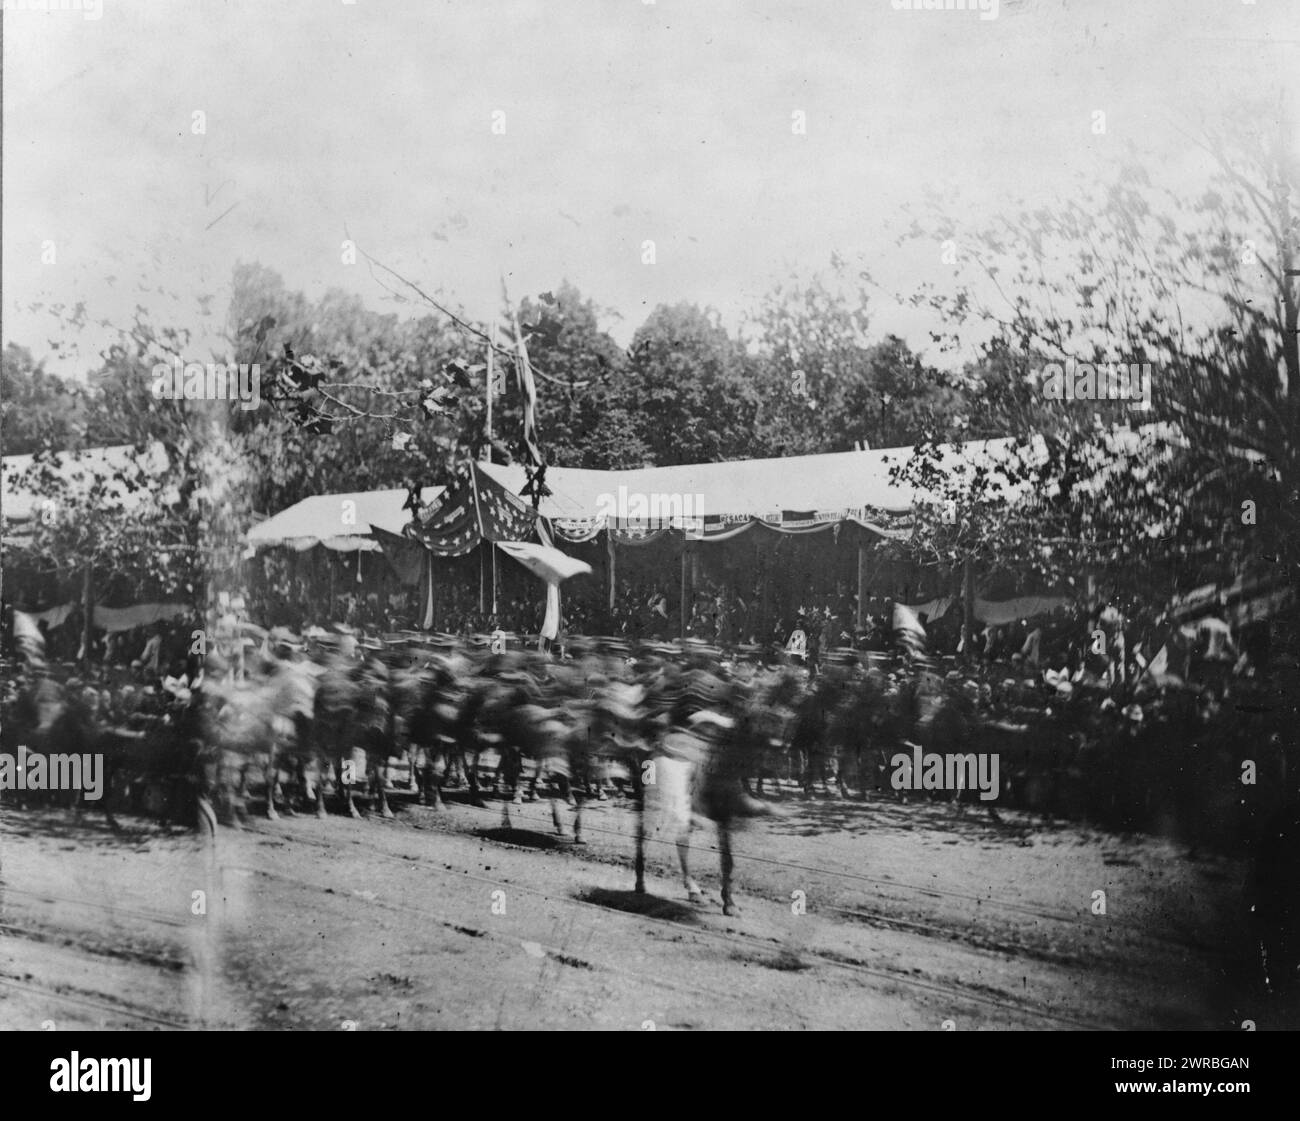 Mounted cavalry riding past reviewing stand during the 'grand review' of the Union Army, Washington, D.C., photographed 1865, printed 1905, United States., Army, Rites & ceremonies, Washington (D.C.), 1860-1870, Photographic prints, 1900-1910., Photographic prints, 1900-1910, 1 photographic print Stock Photo